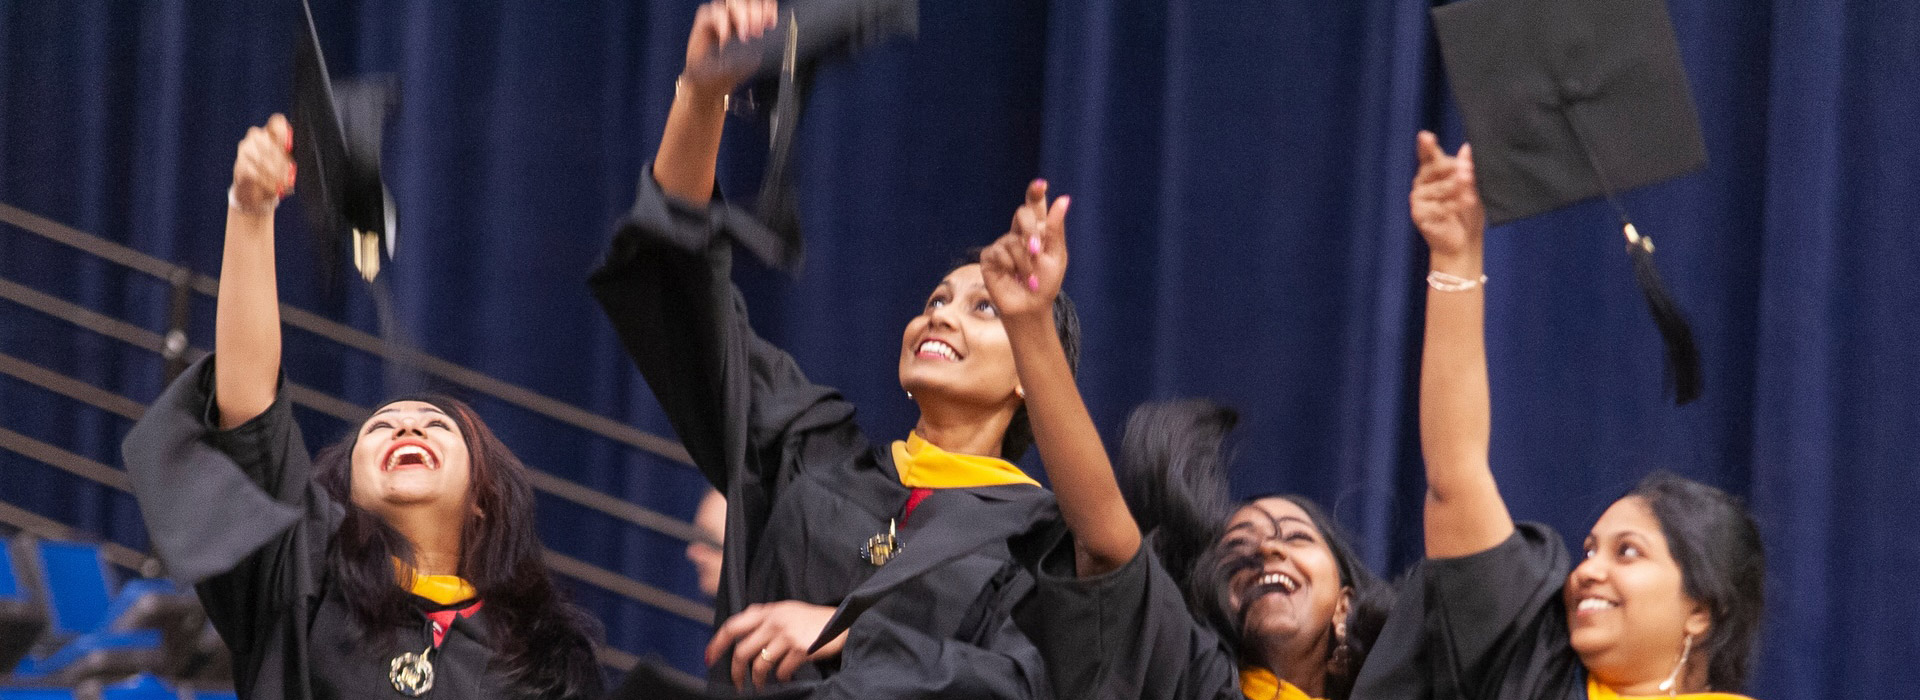 graduates throwing their caps up in the air in celebration